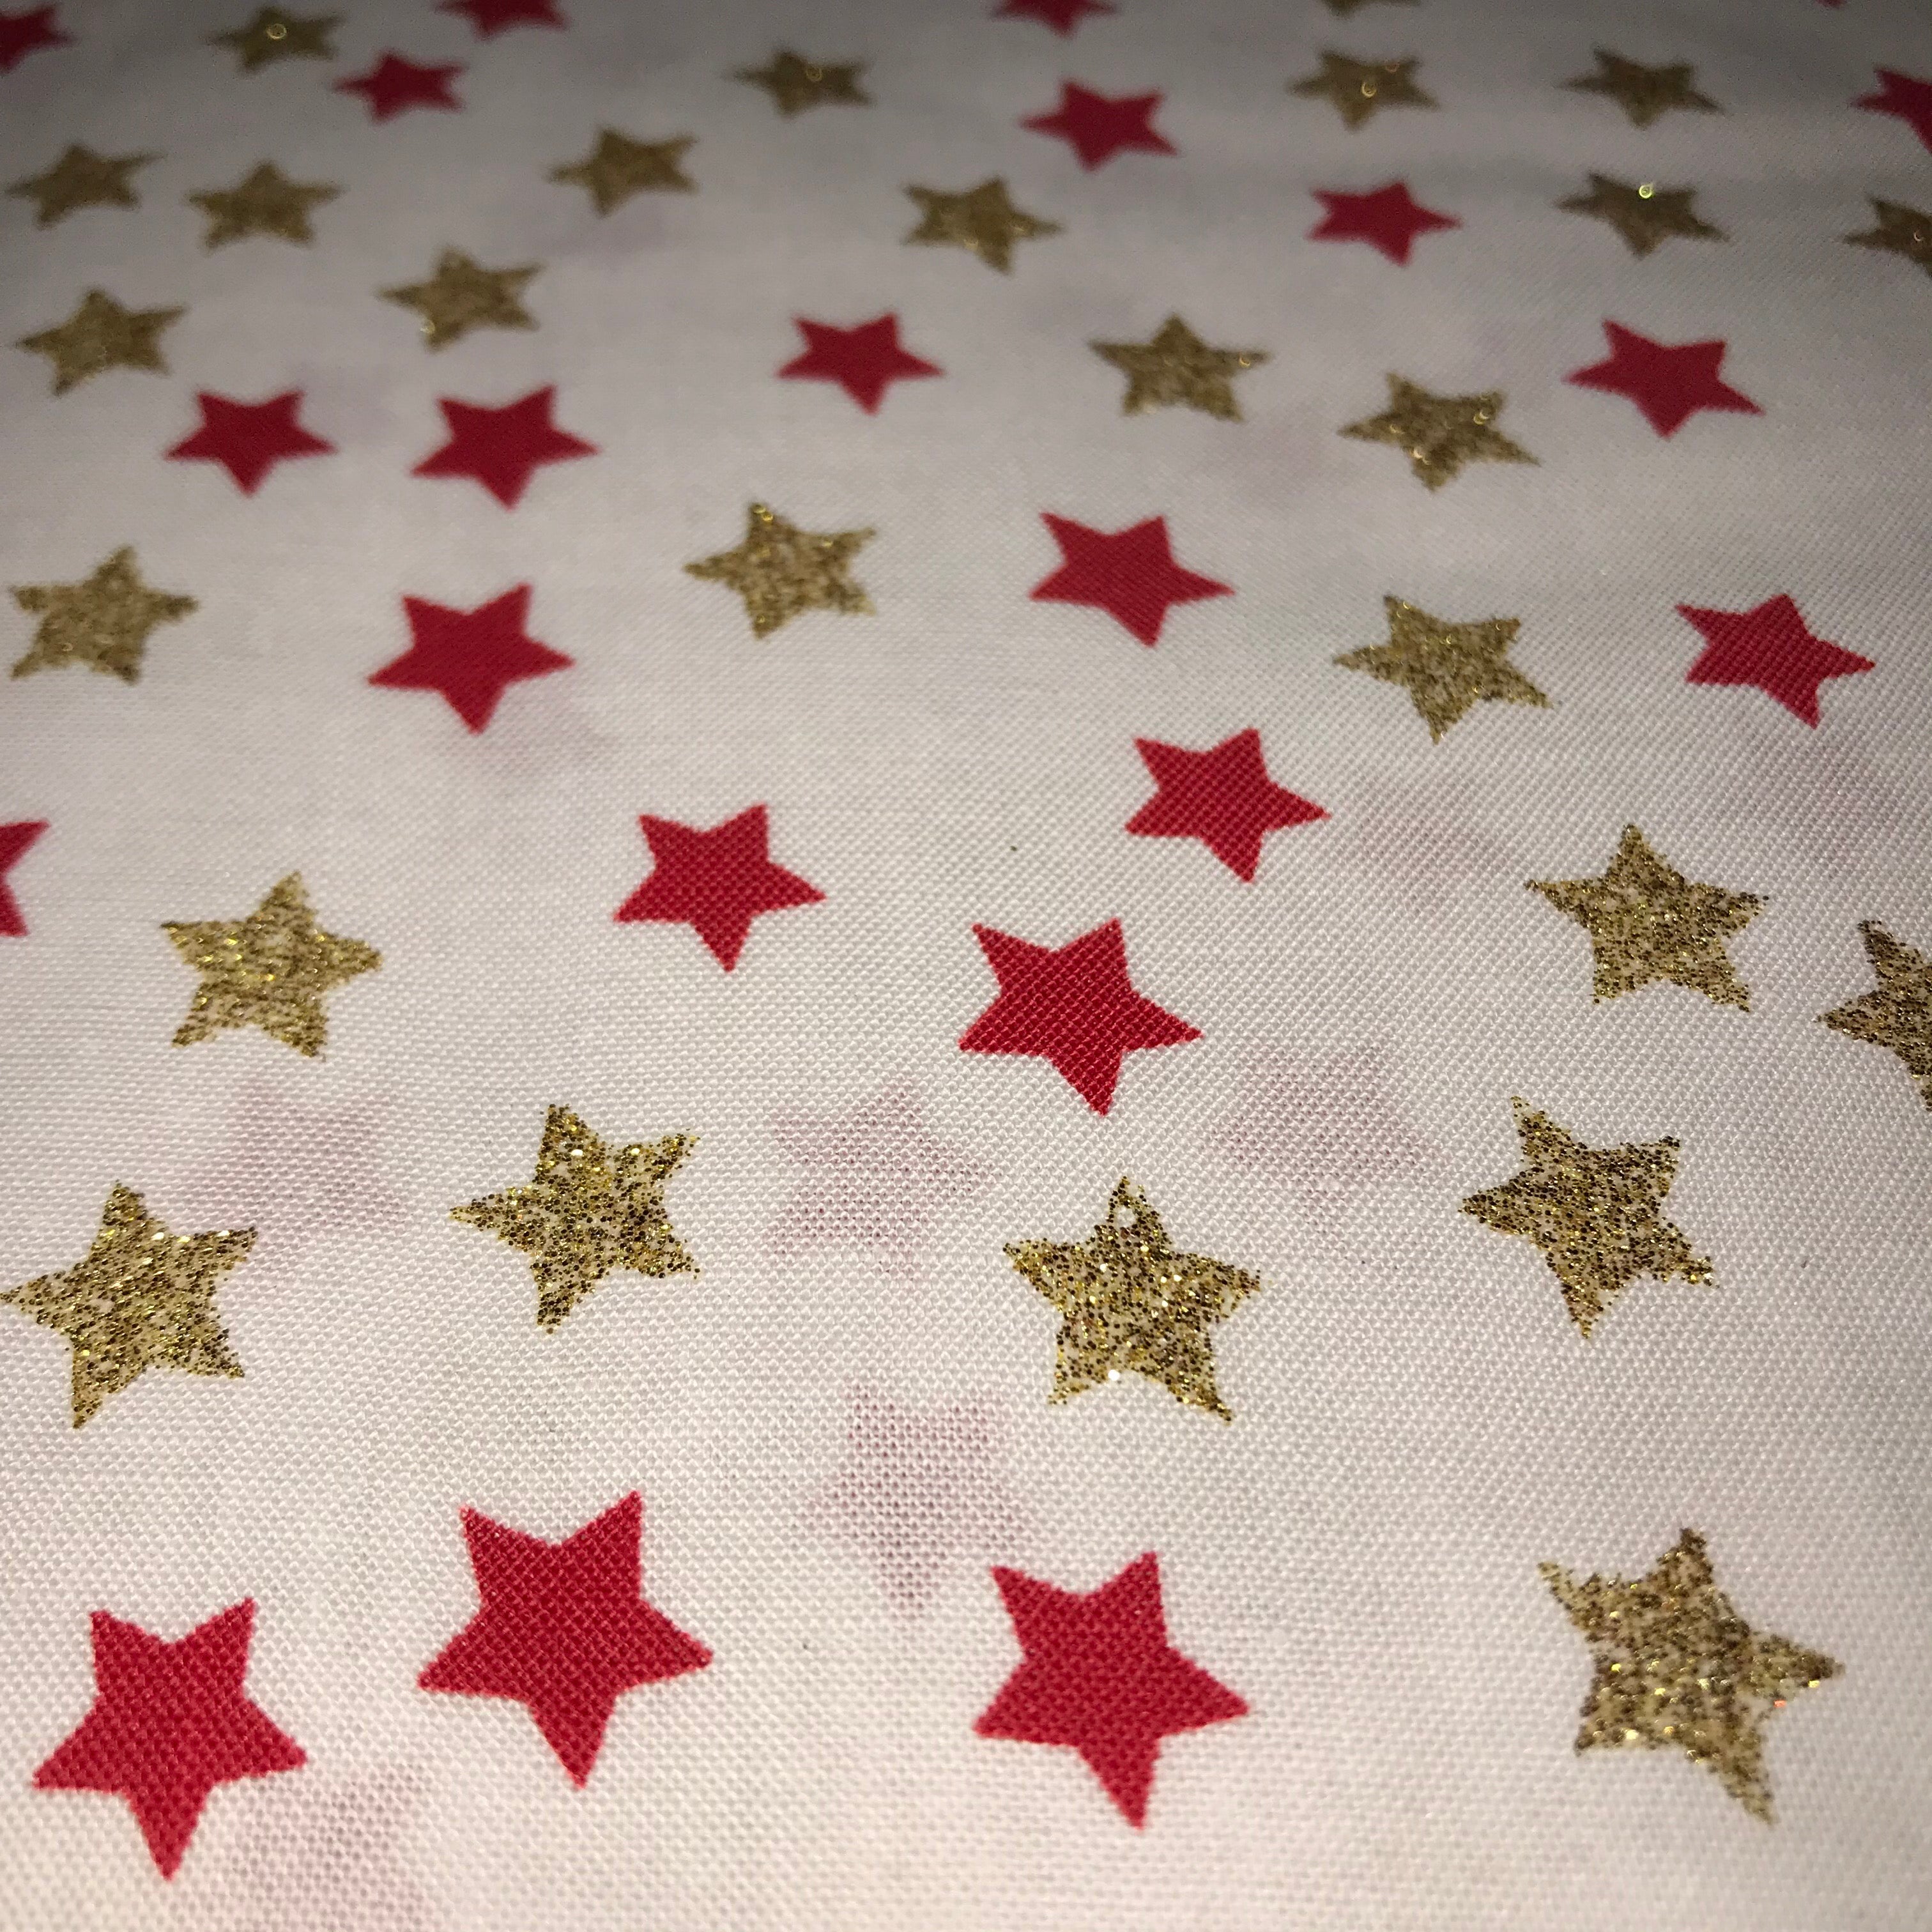 glitter gold stars with red stars on a cream background cotton fabric